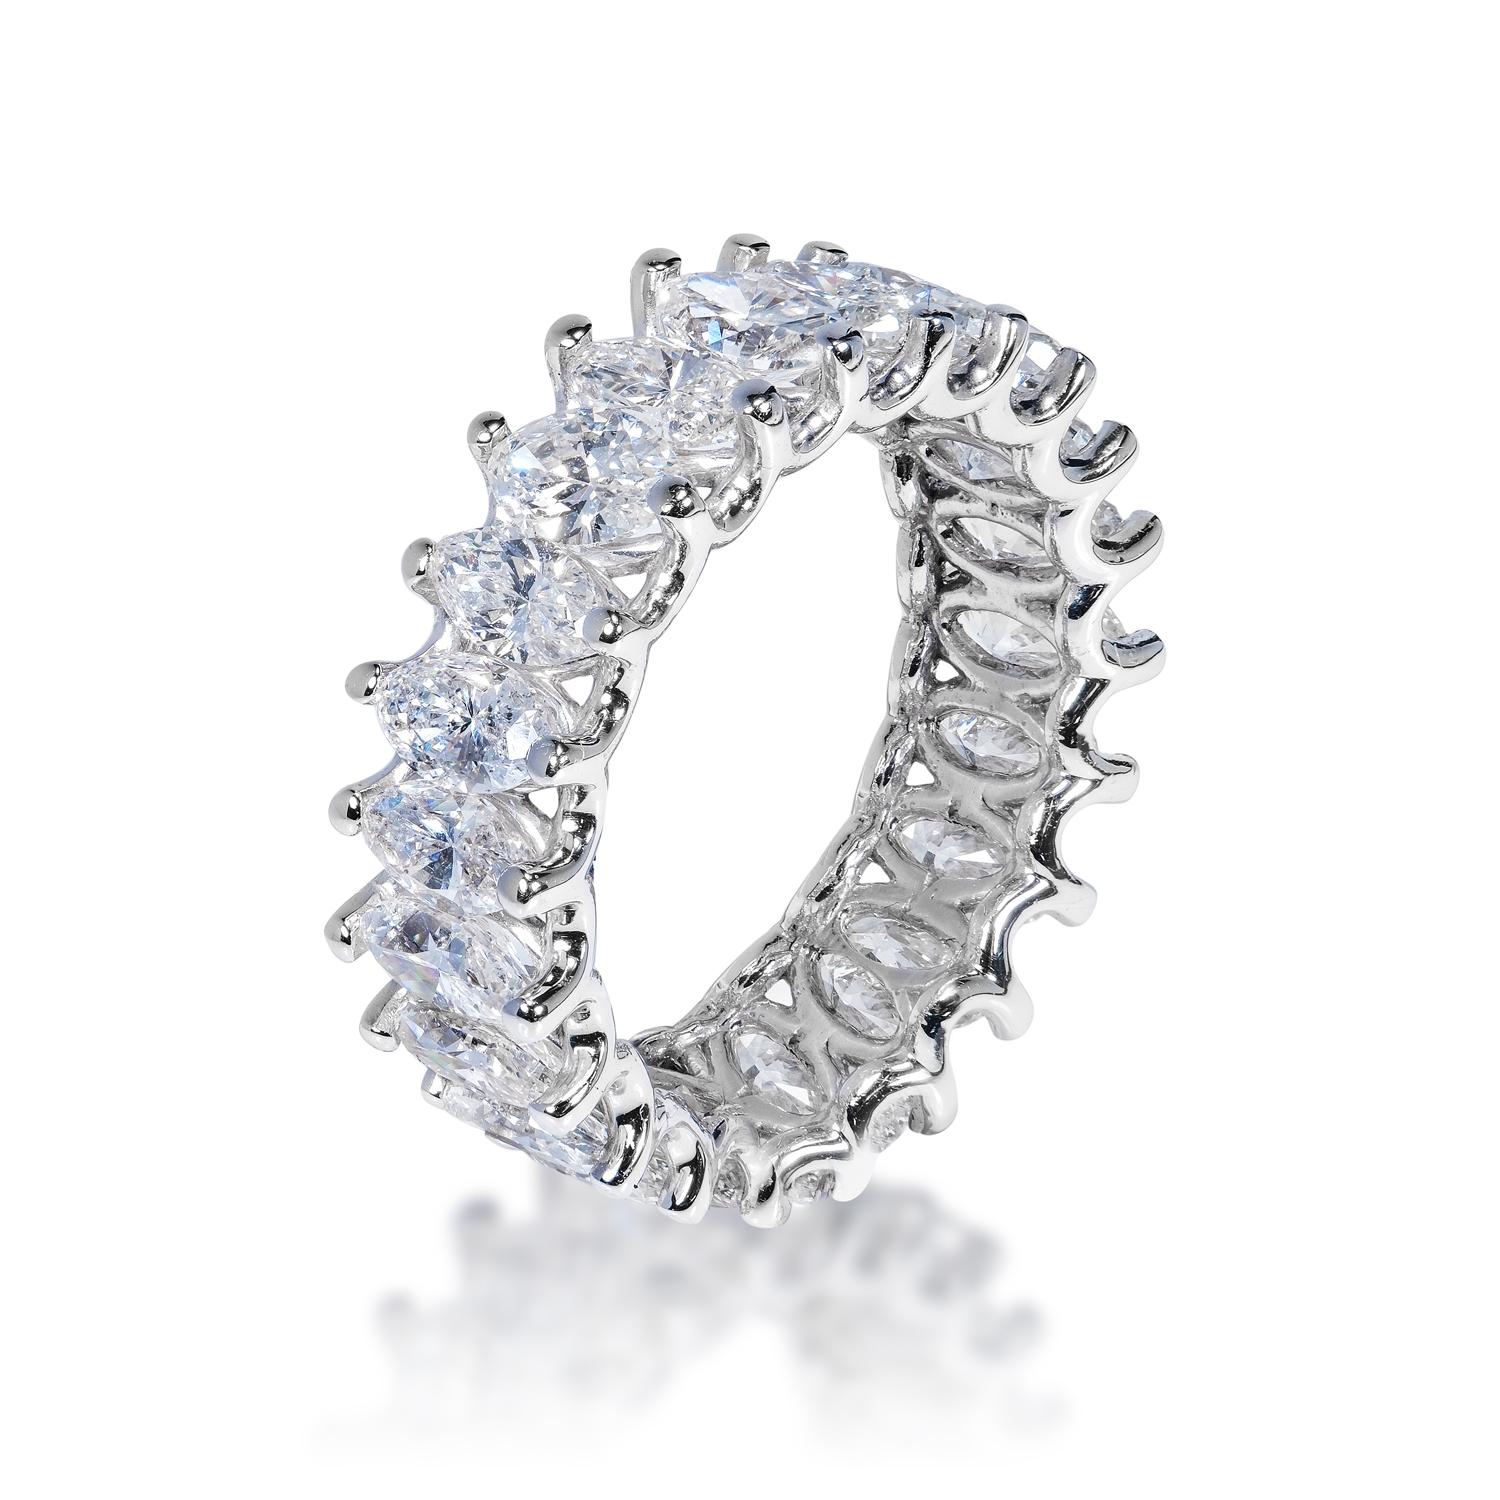 Earth Mined Center Diamond:
Carat Weight: 5.30 Carats
Number of Diamonds: 22
Style: Oval Cut

Setting: U-shape Shared Prong
Metal: 14 Karat White Gold

Total Carat Weight: 5.30 Carats